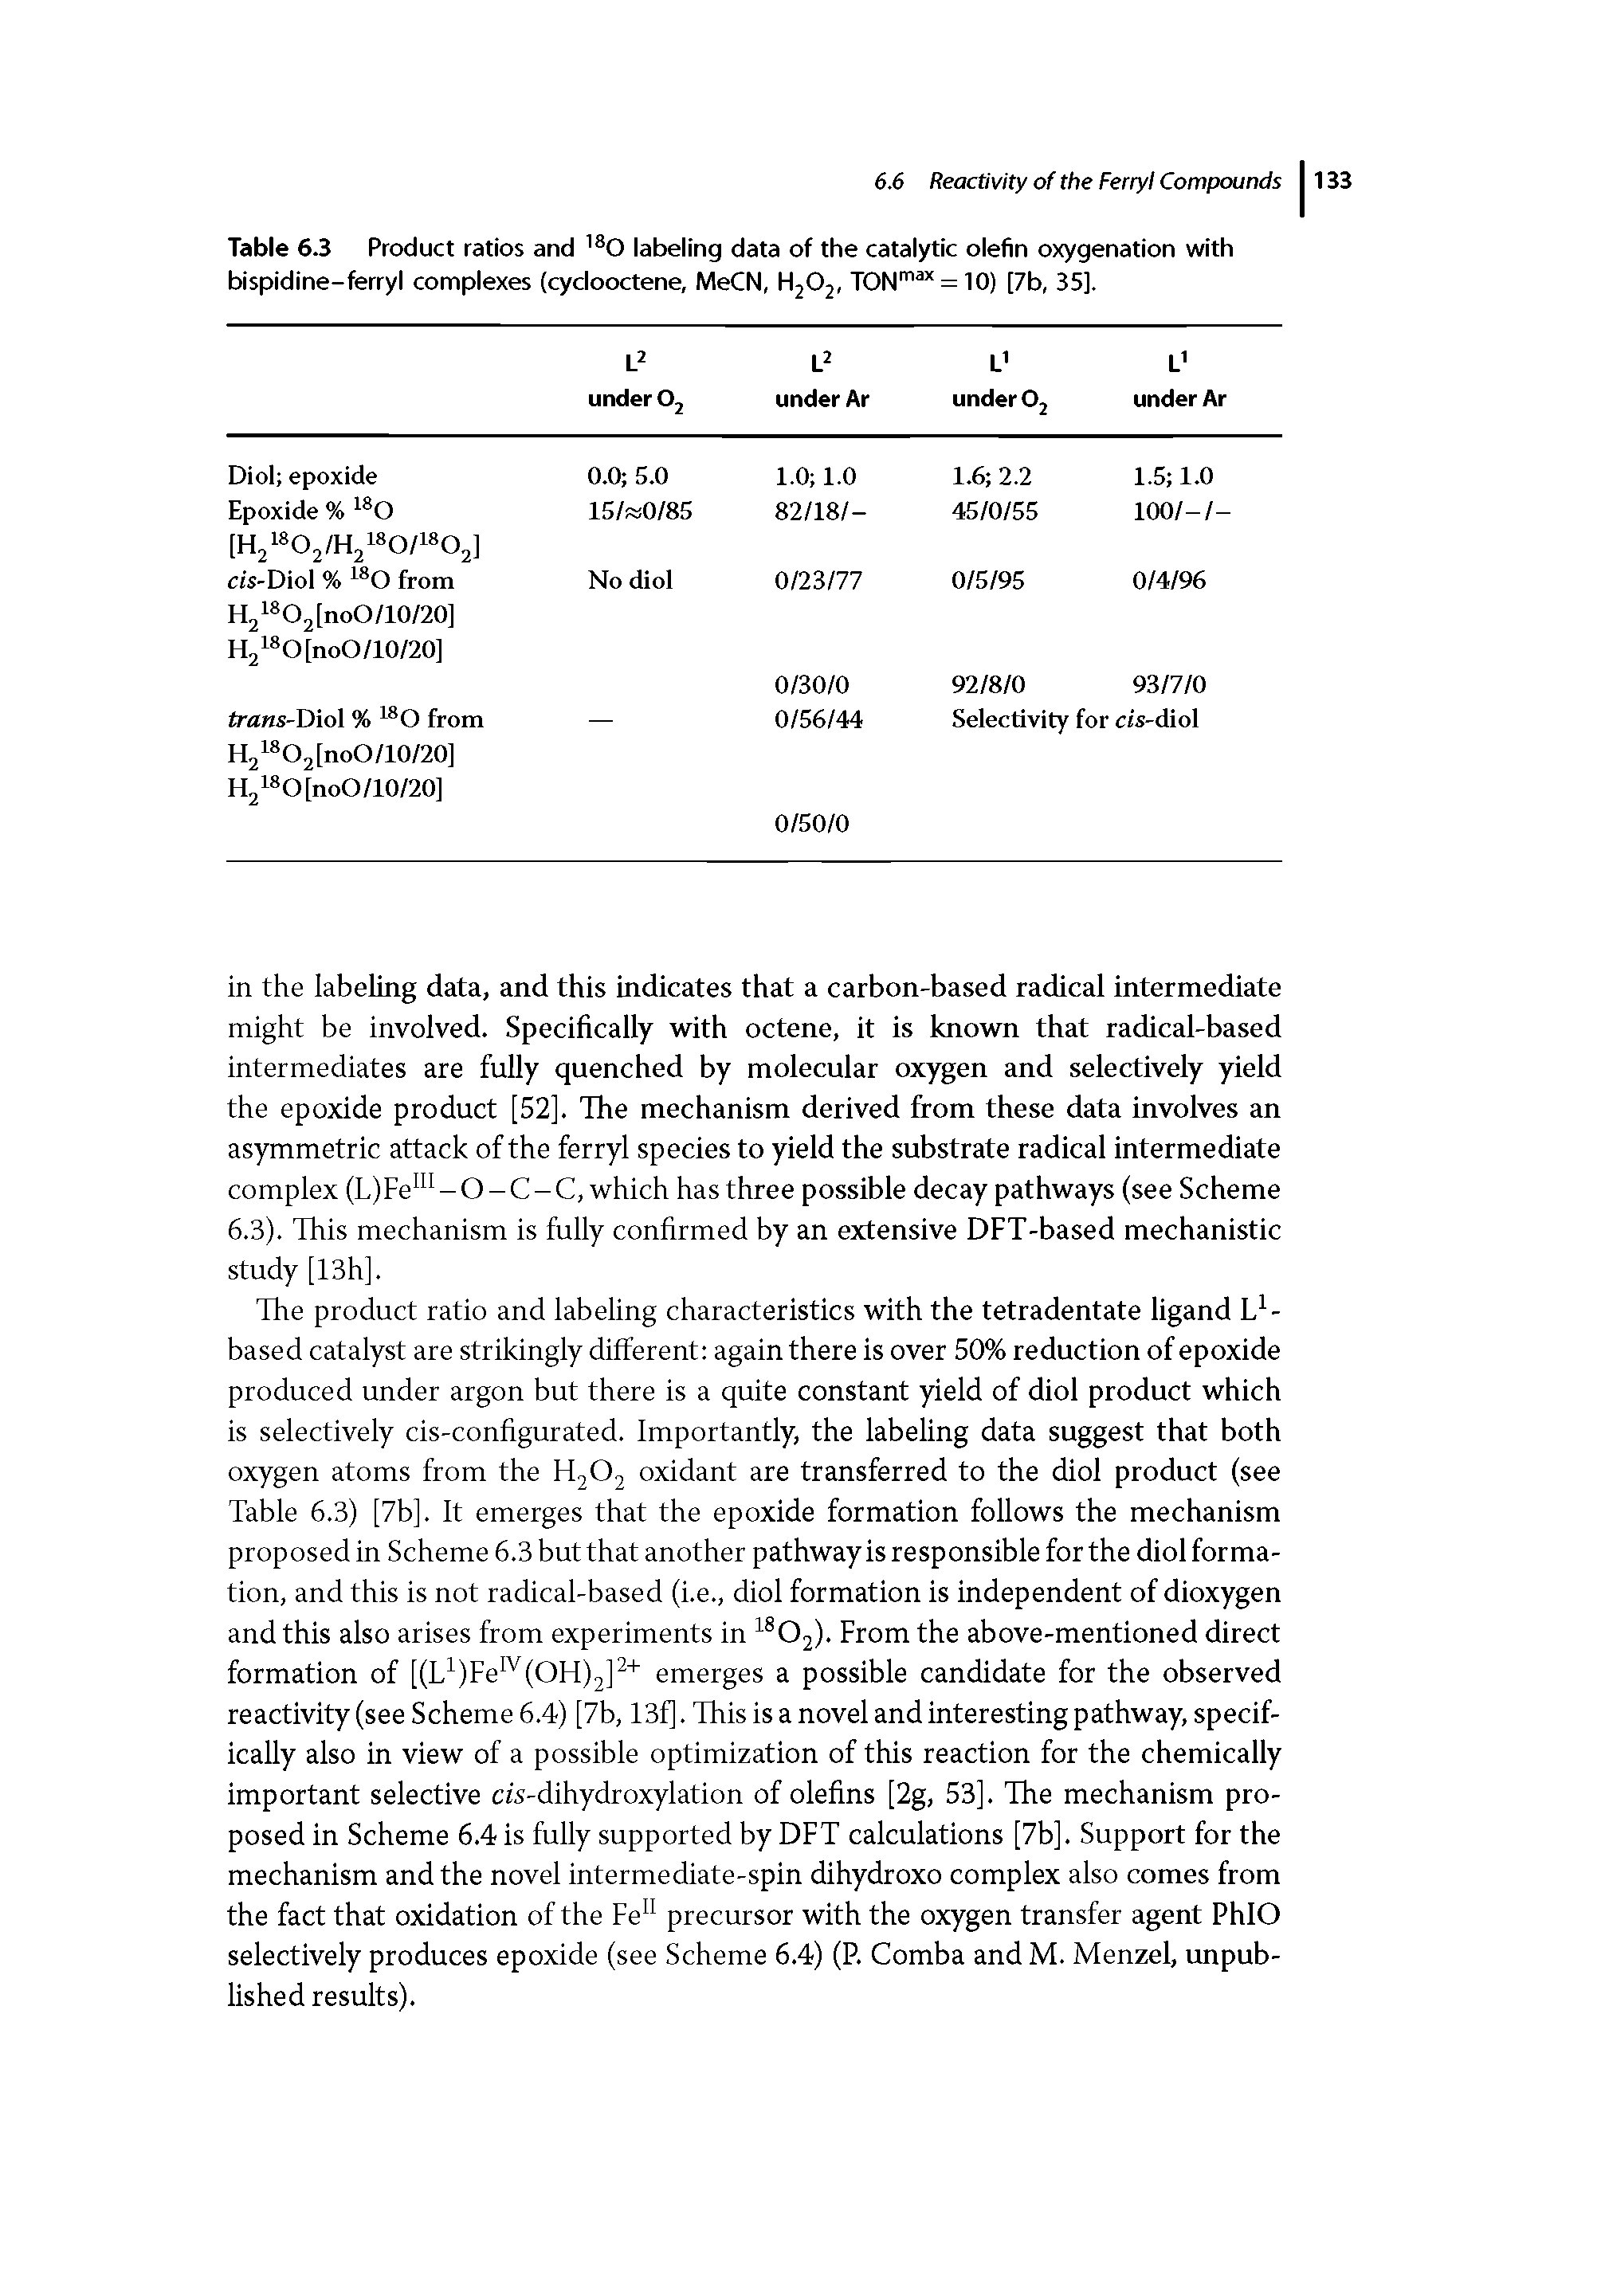 Table 6.3 Product ratios and 0 labeling data of the catalytic olefin oxygenation with bispidine-ferryl complexes (cyclooctene, MeCN, HjOj, TON" = 10) [7b, 35],...